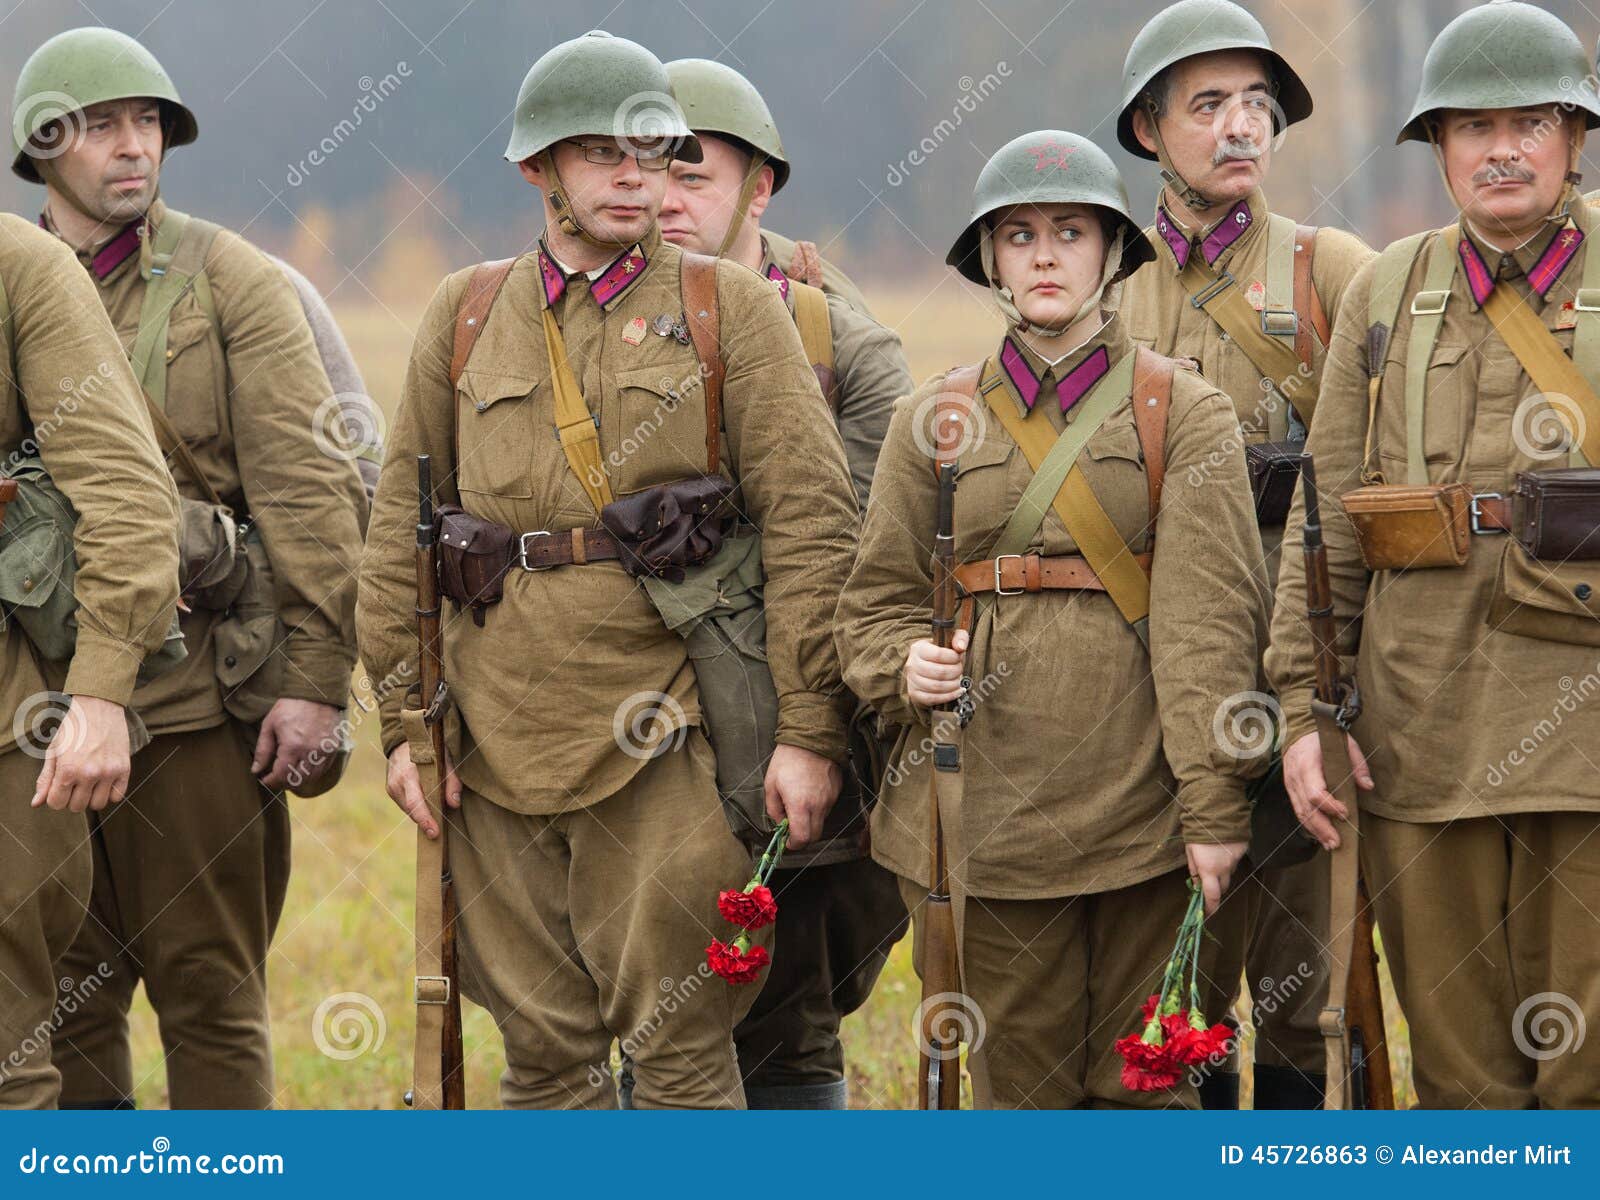 Soldiers with flowers editorial stock photo. Image of history - 45726863